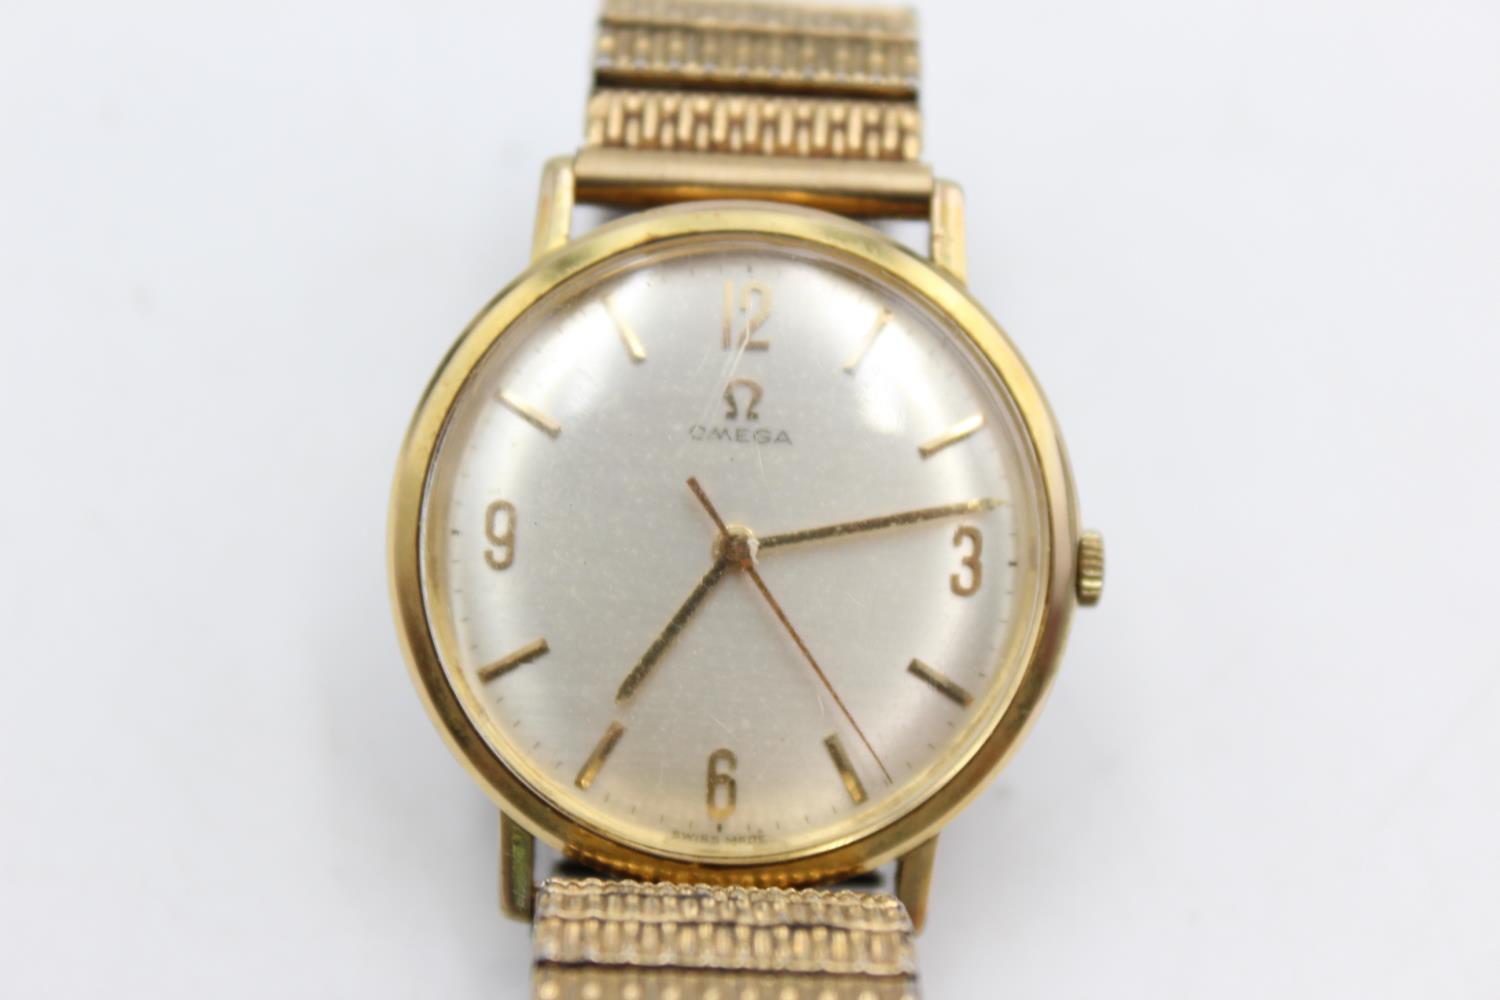 Vintage Gents OMEGA Gold Tone Dress Style WRISTWATCH Hand-Wind WORKING - Image 2 of 5